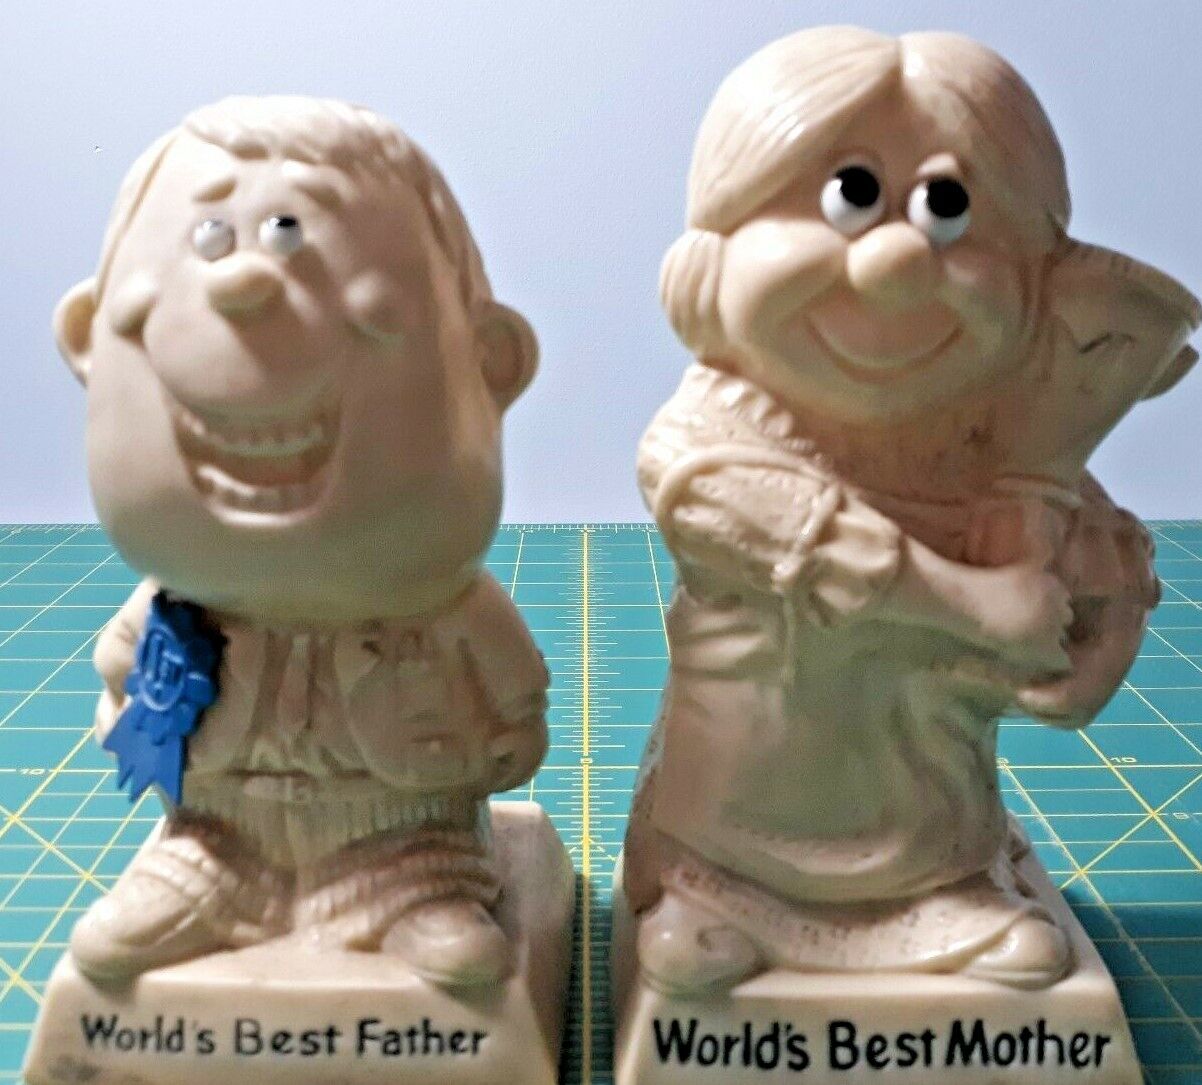 2 Vintage 1970 R & W Russ Berrie Co WORLD'S BEST FATHER & MOTHER Figurines